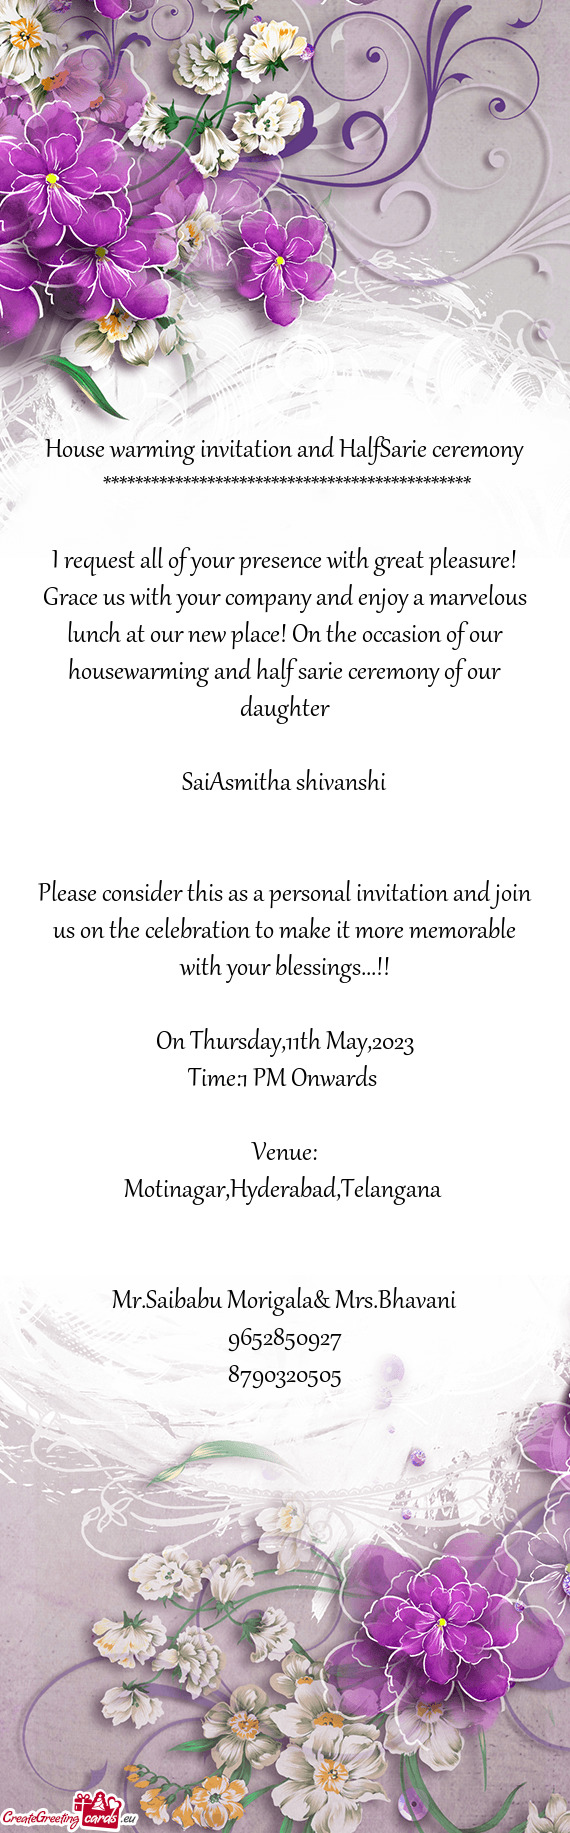 House warming invitation and HalfSarie ceremony